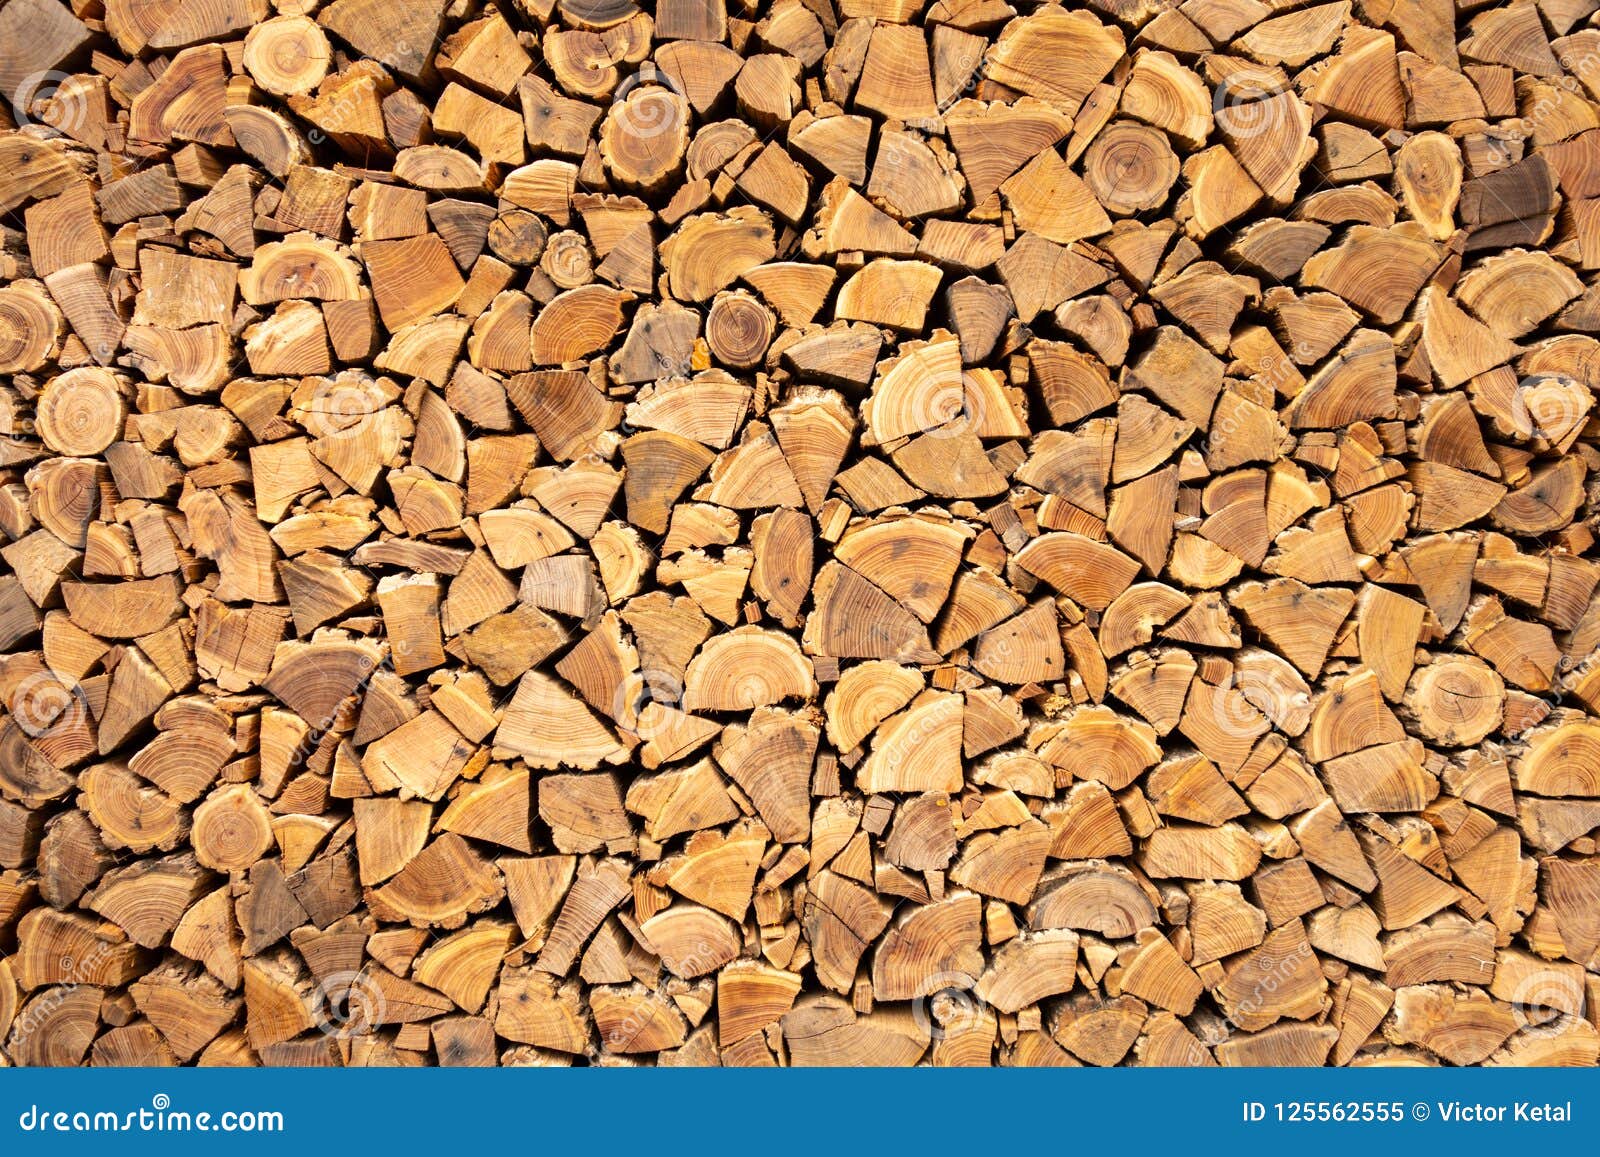 creative brown background of neatly stacked firewood. brown texture of natural wood.